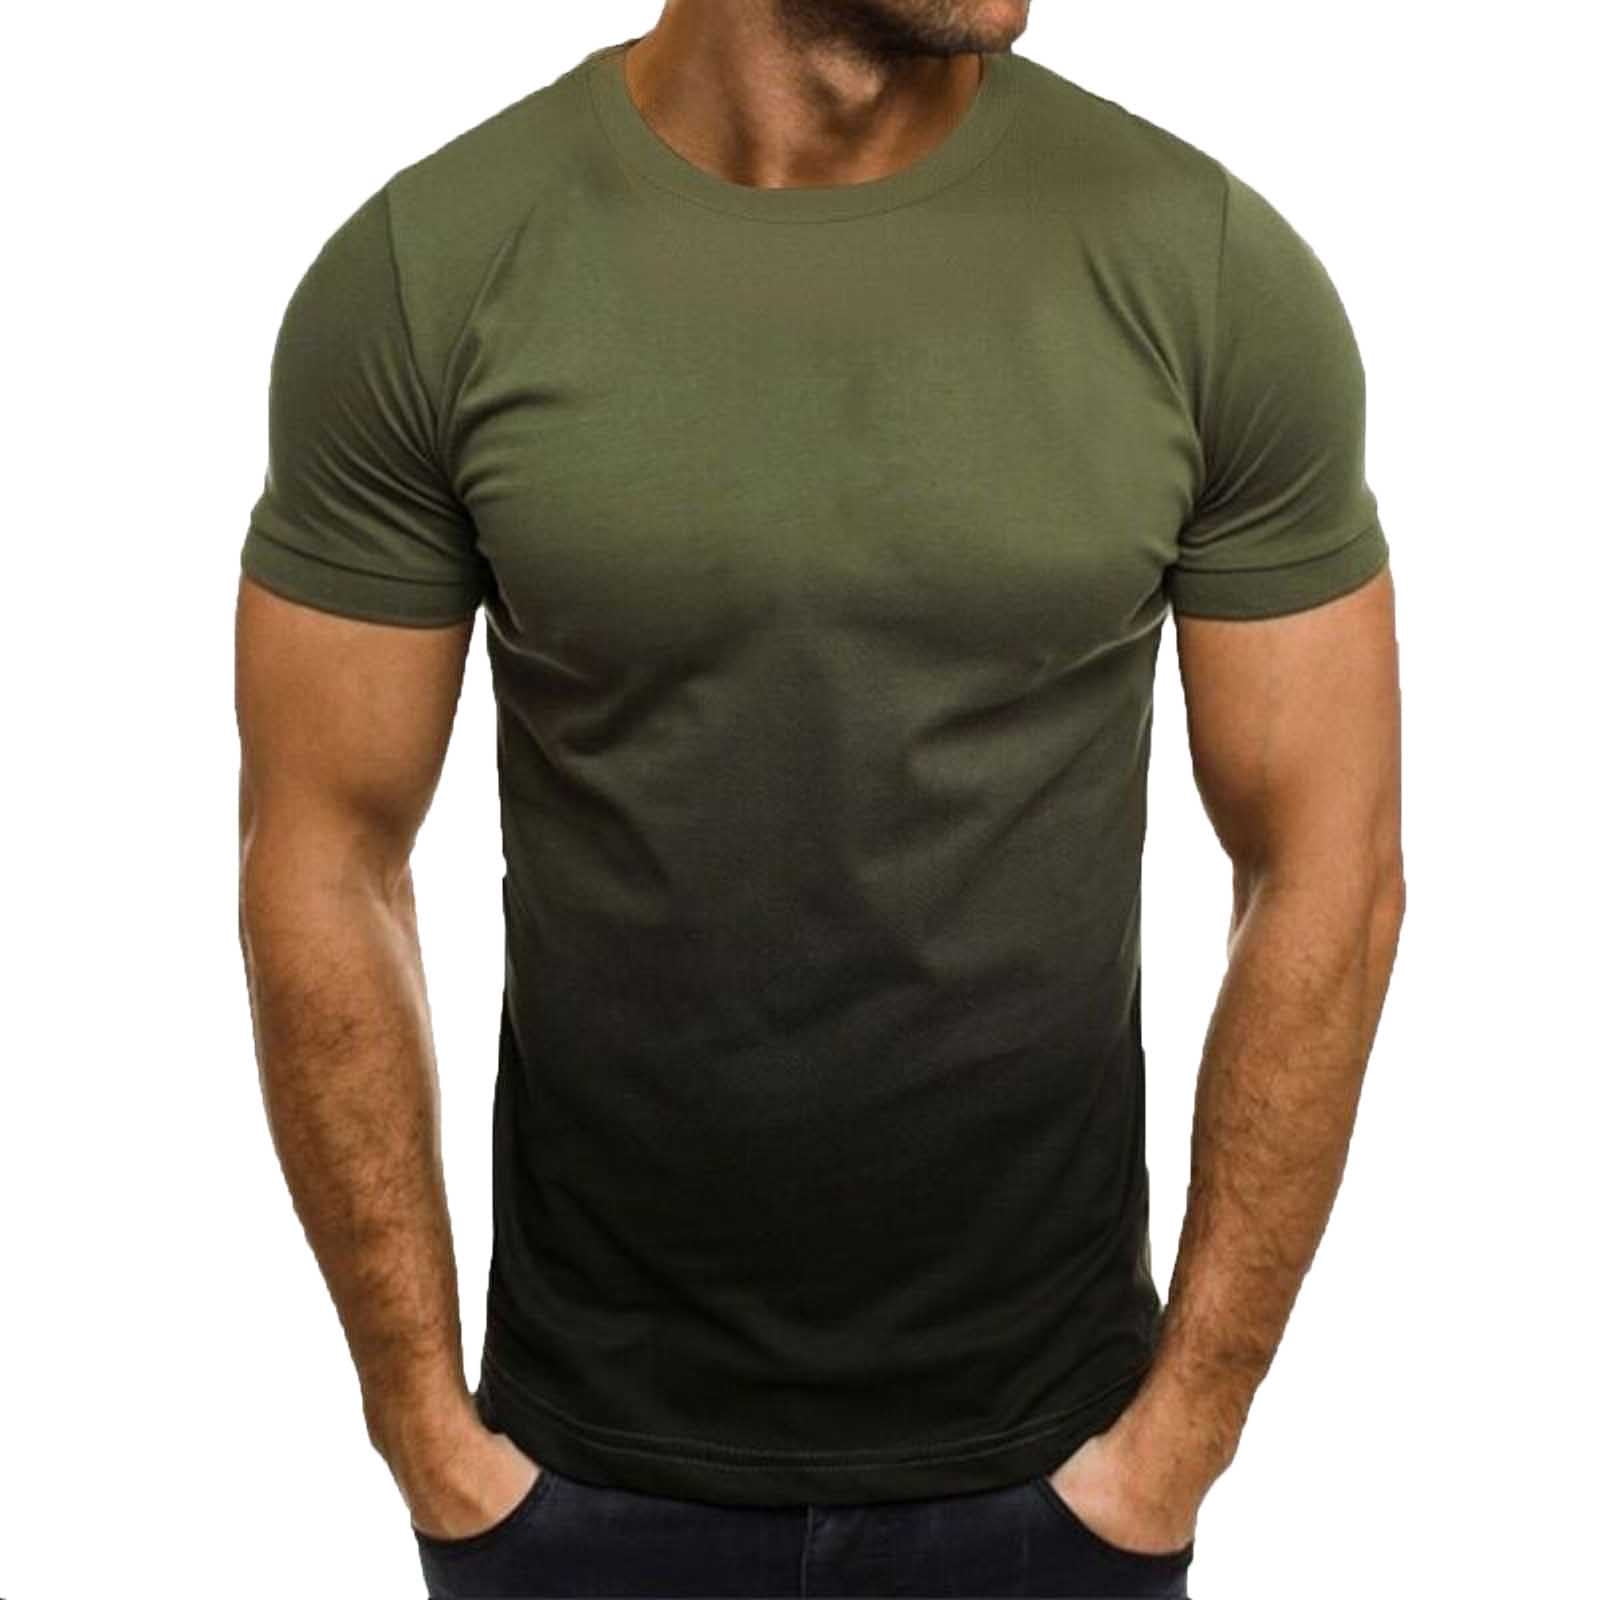 Homadles Soft Style T-Shirt for Men- On Sale Round Neck Green Size XL ...